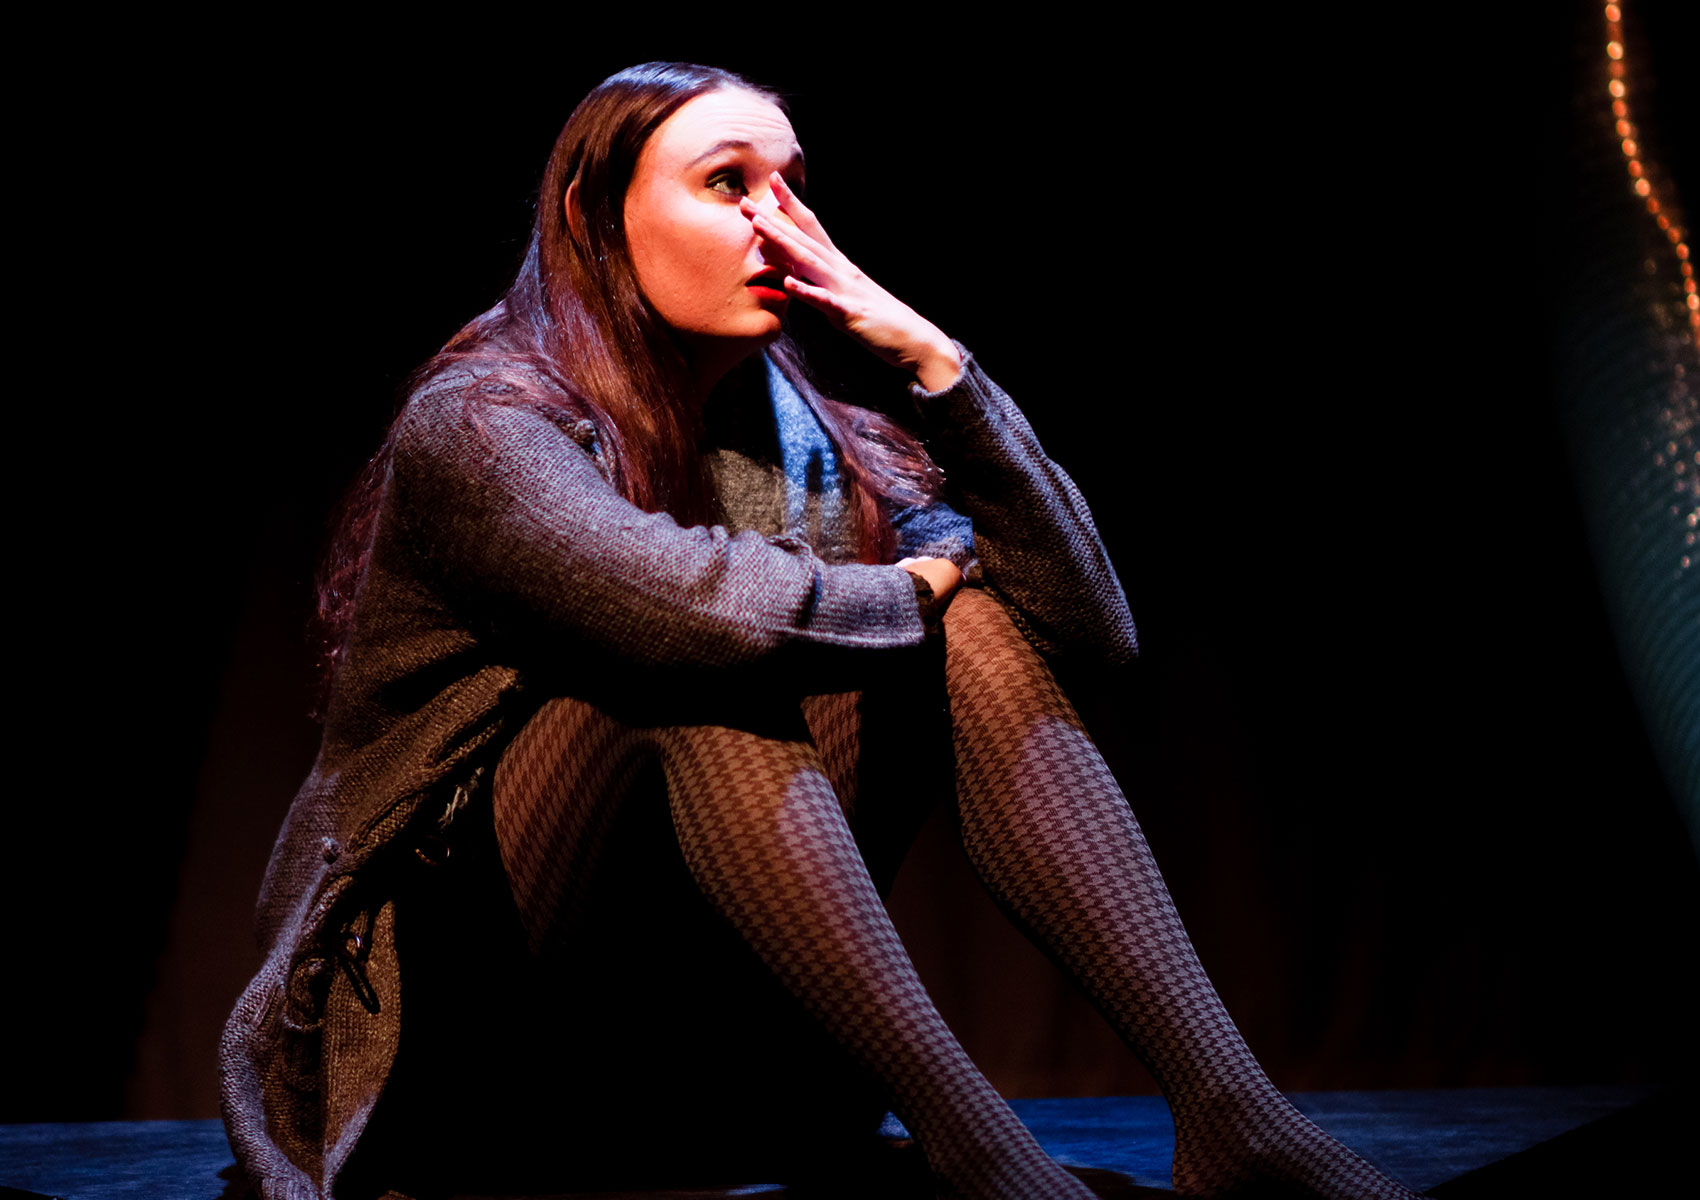 A woman sits on a platform with her knees to her chest. Her right arm and hand are resting on the opposite knee while she holds her left hand to her face. She is looking out over her fingertips toward stage left.